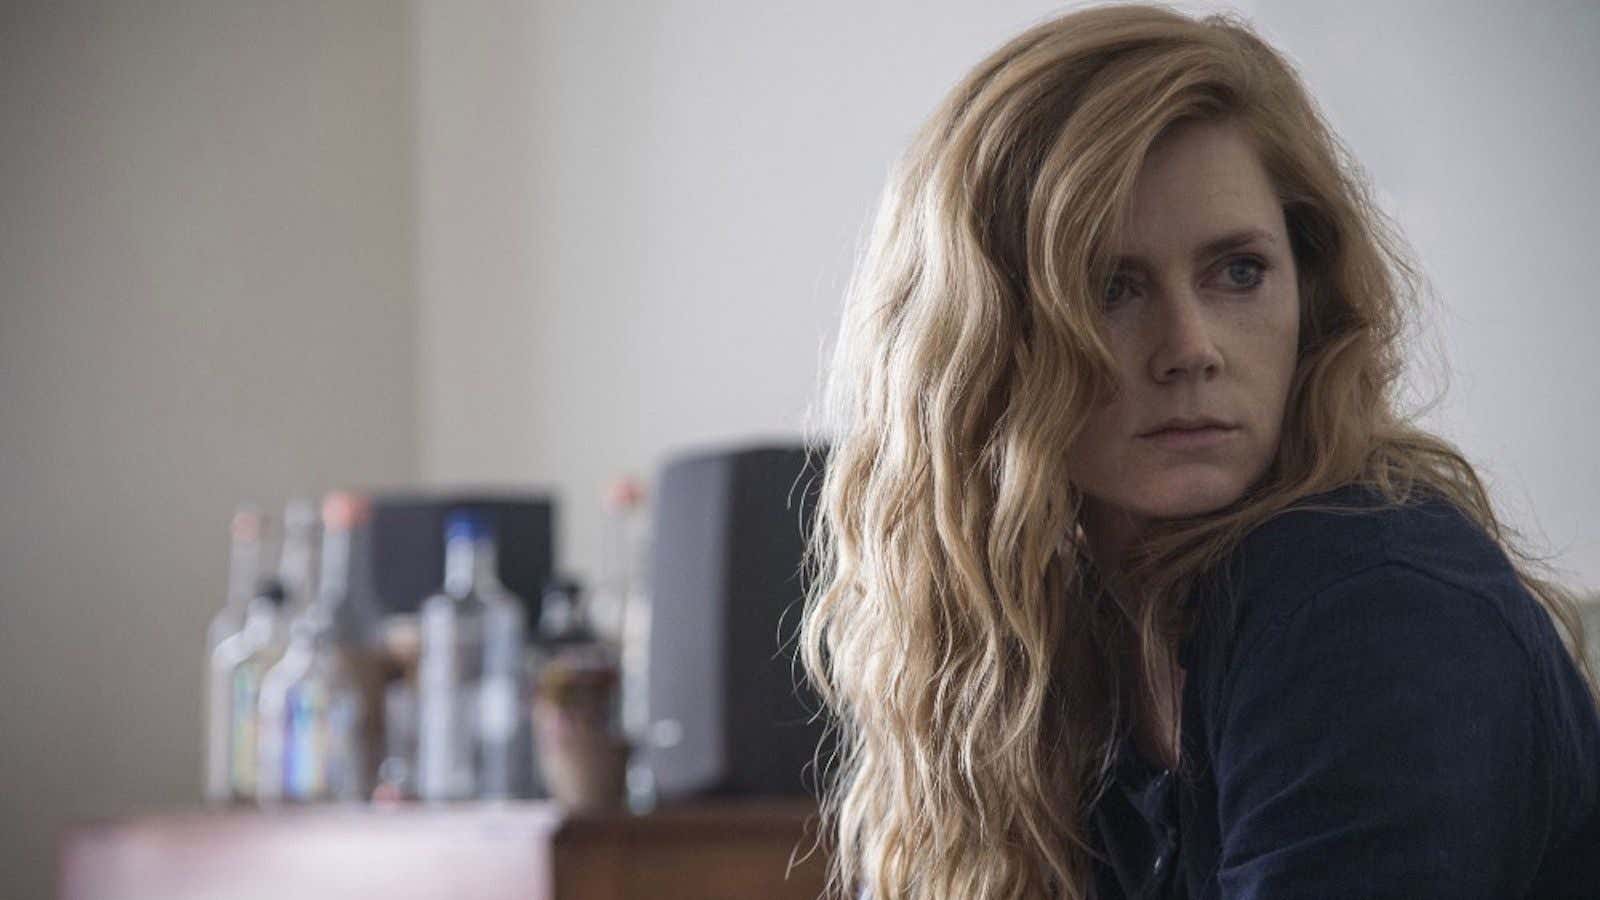 HBO’s “Sharp Objects,” starring Amy Adams, featured some unforgettable scenes.